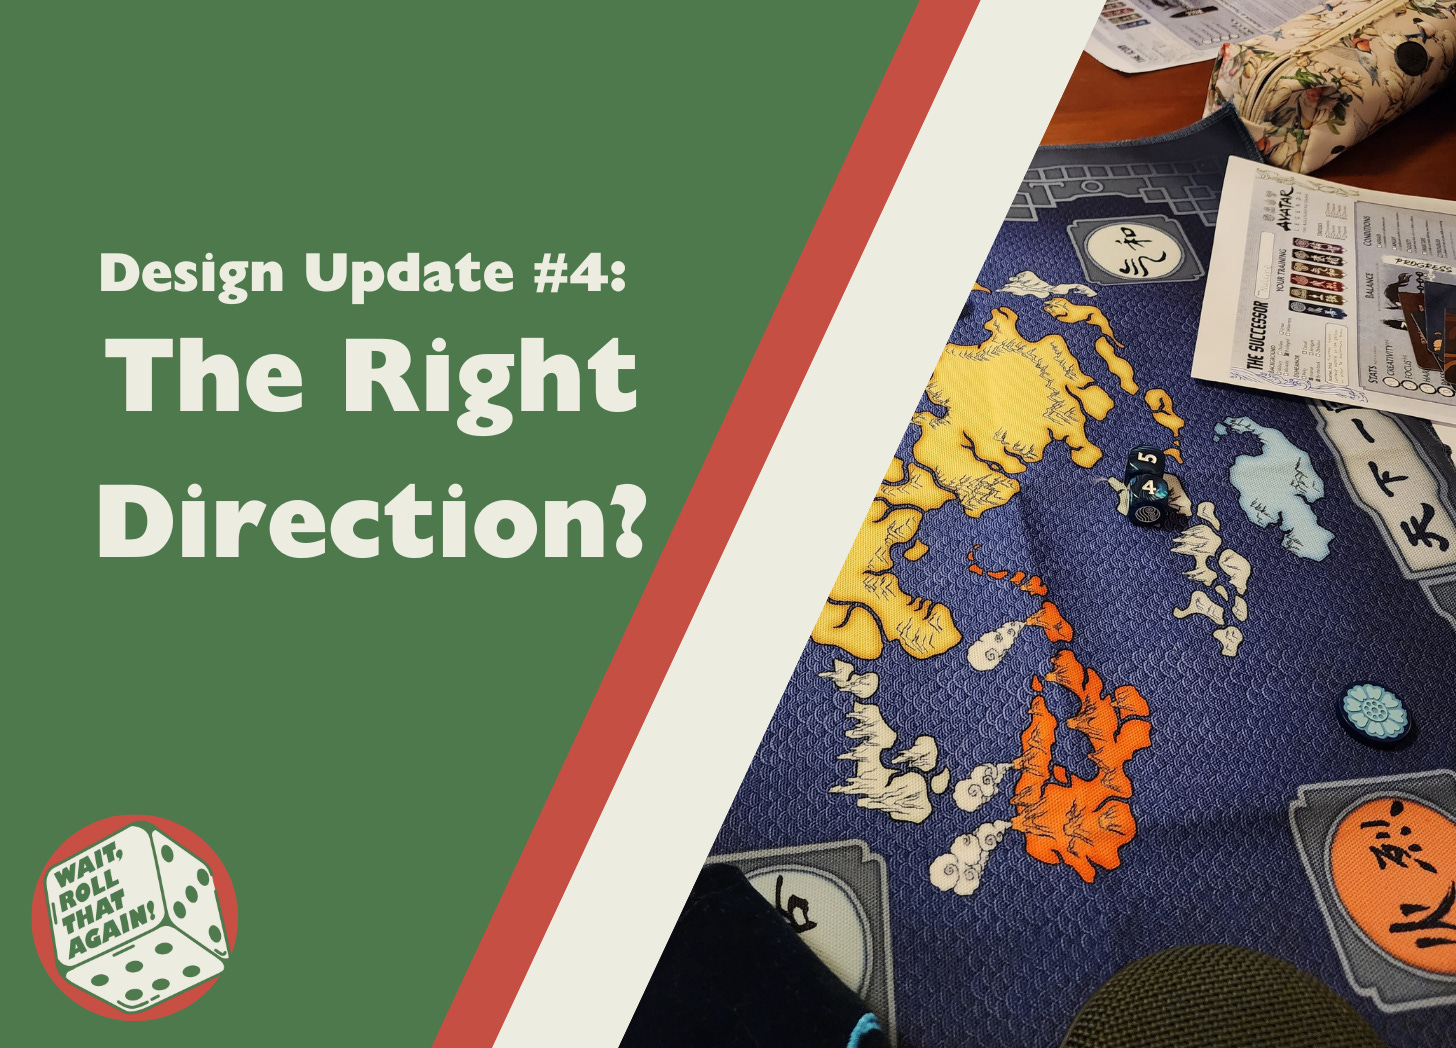 Cover image for the article, with the title "Design Update 4: The Right Direction". A picture of an RPG map and some character sheets